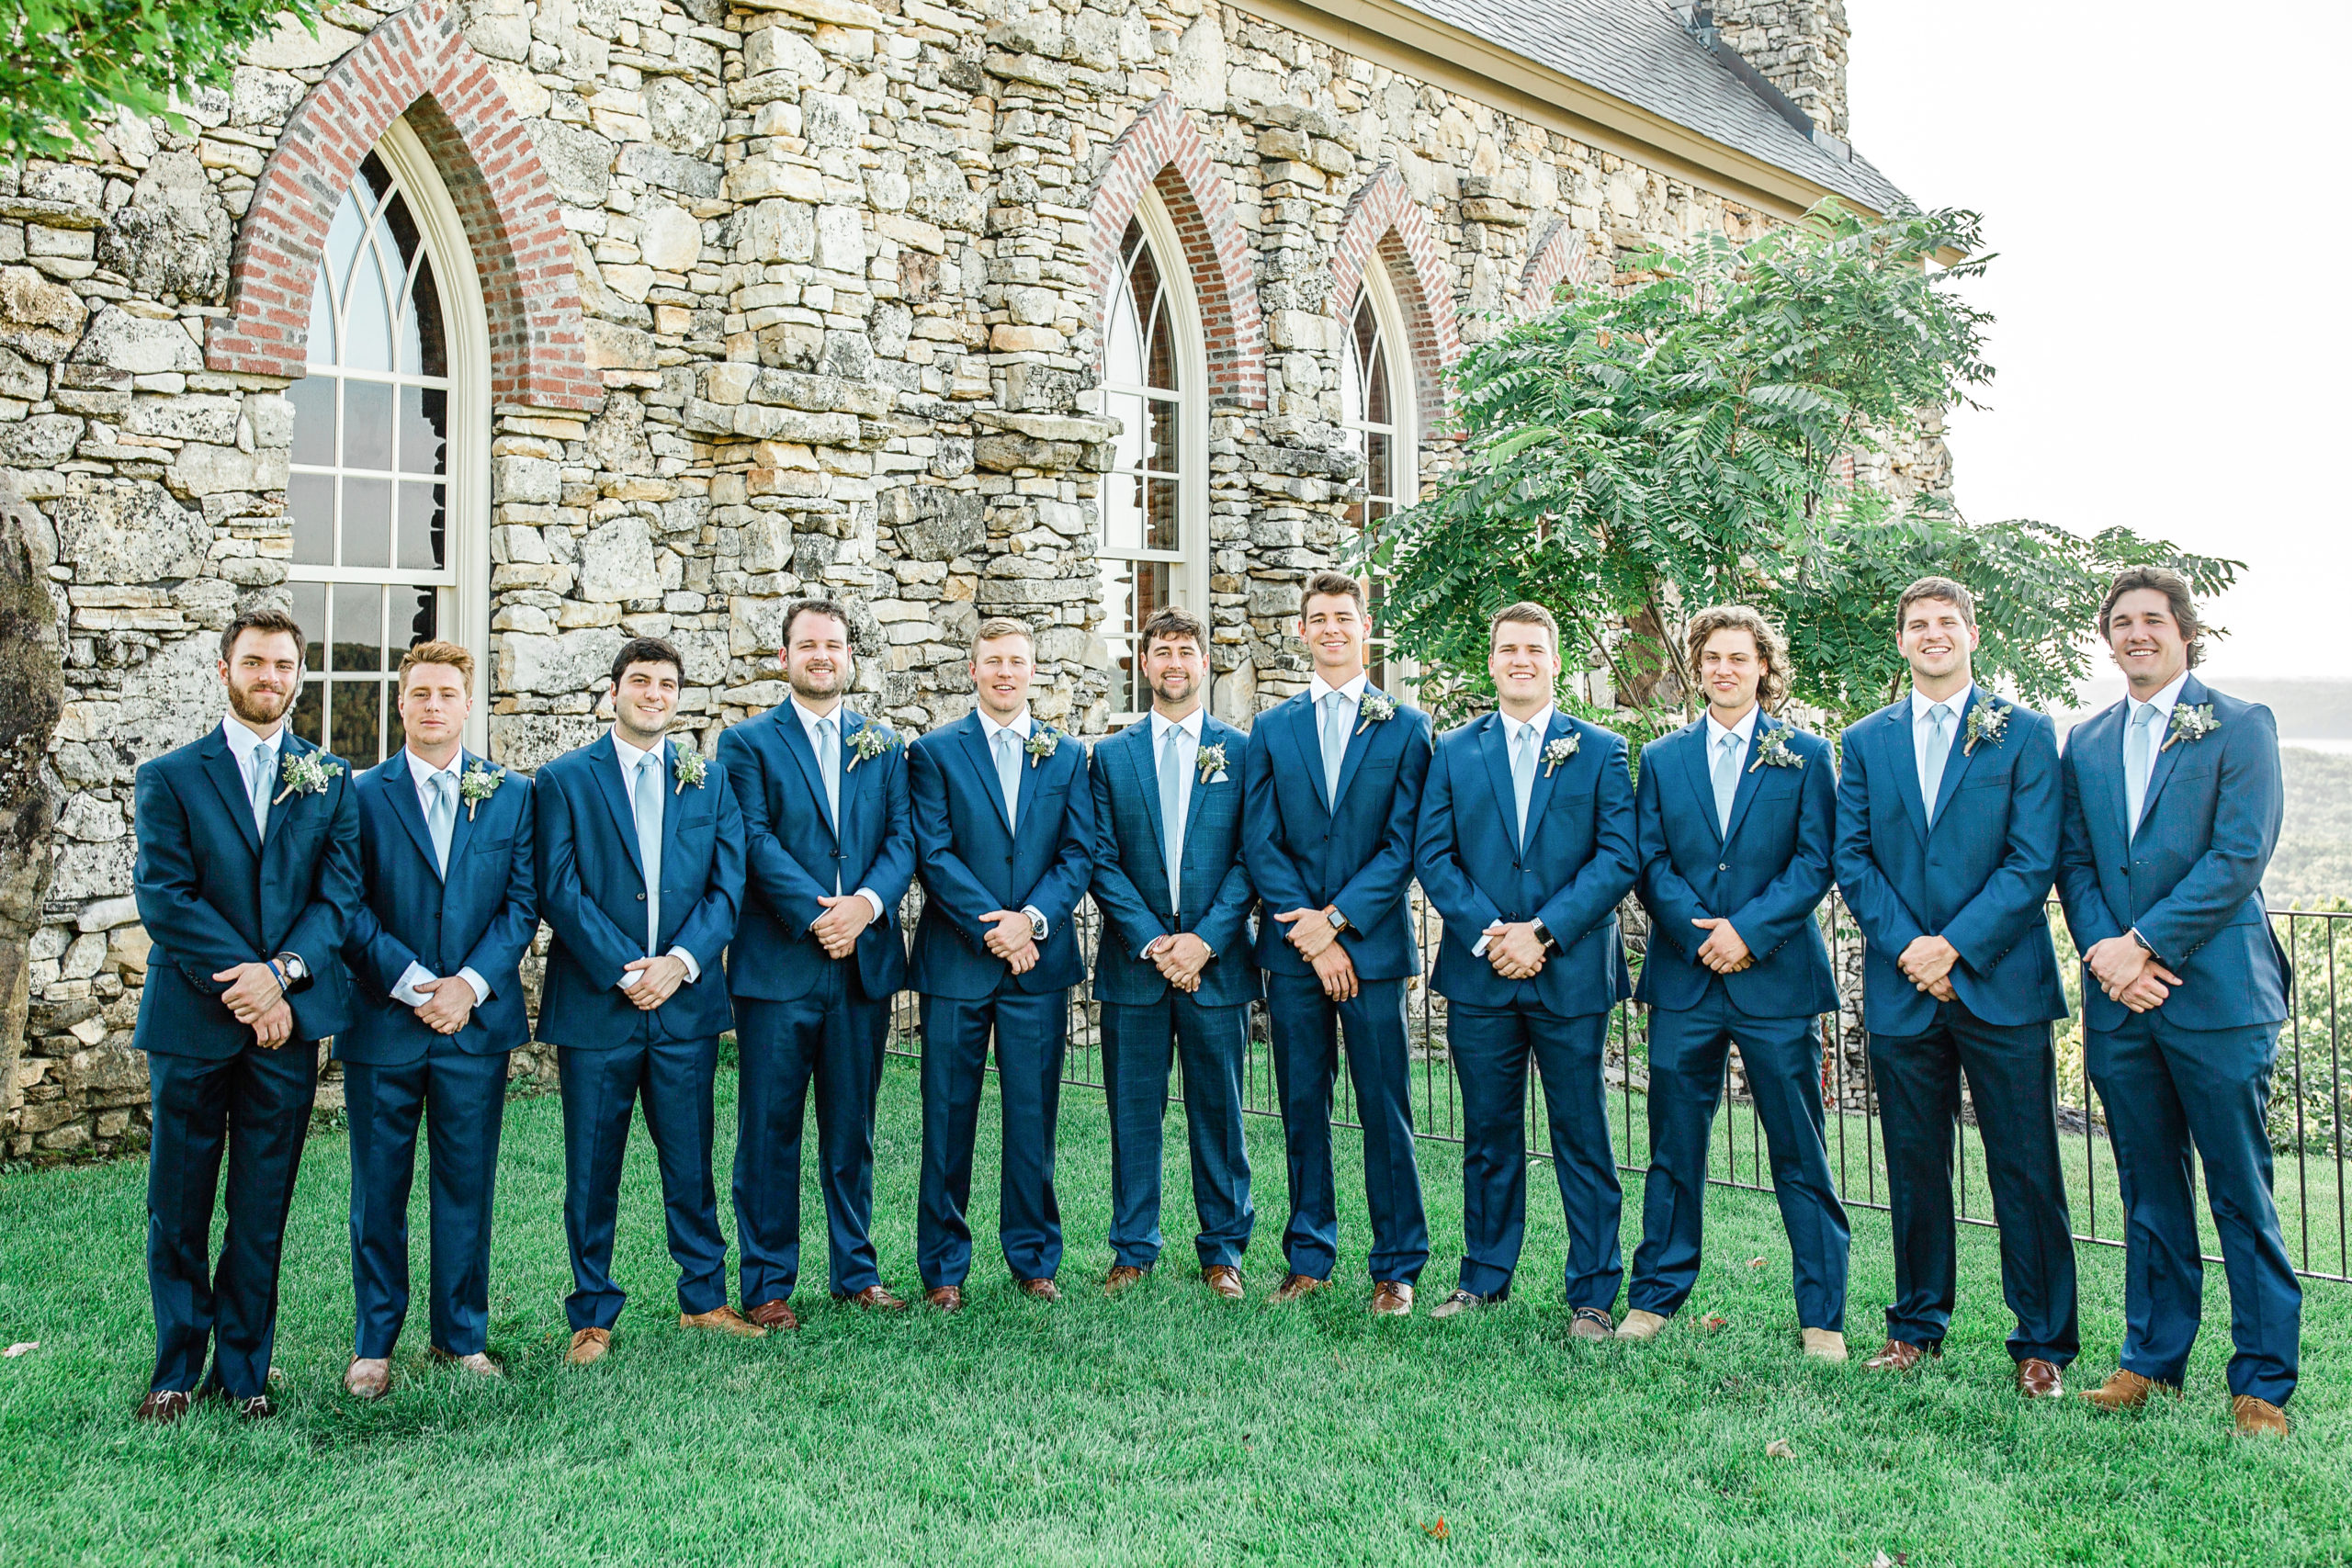 Groom with his groomsmen at Top of the Rock, Ozarks Chapel portraits by Tatyana Zadorin Photography